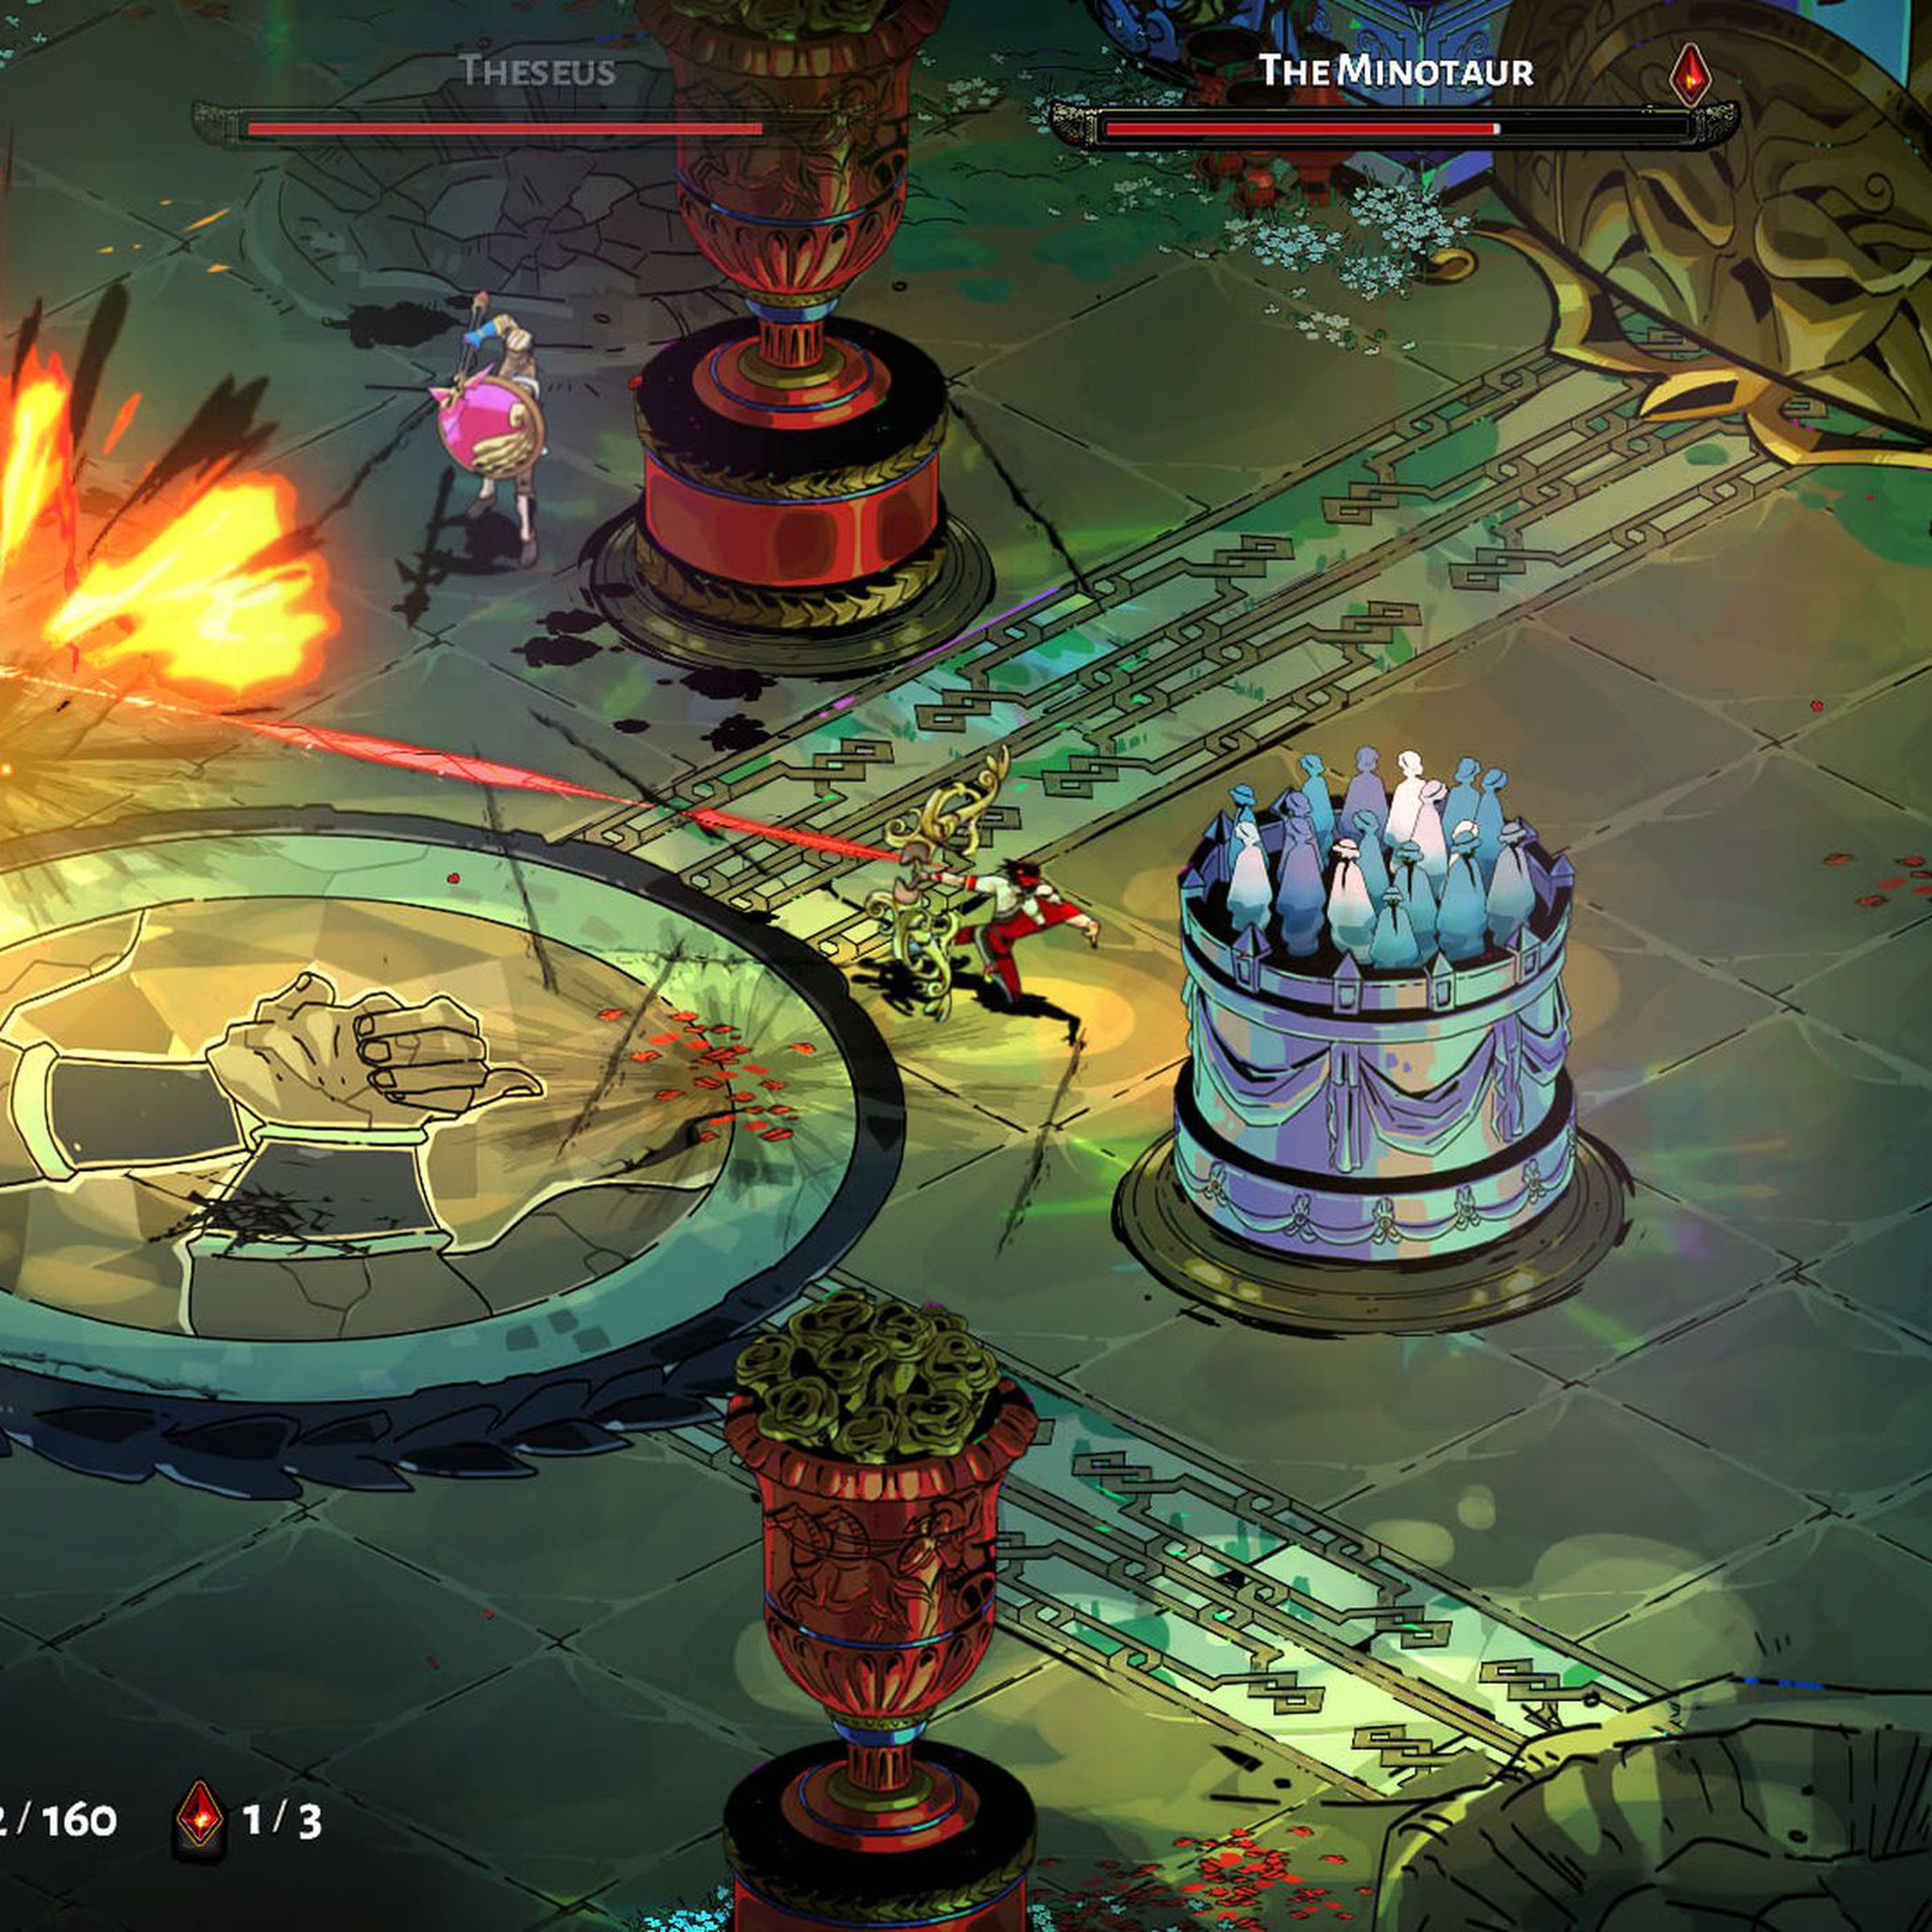 Game screenshot showing green surface with small tower with people standing on it, a large circle decorated with two clasping hands, a vase with greenery, and characters.